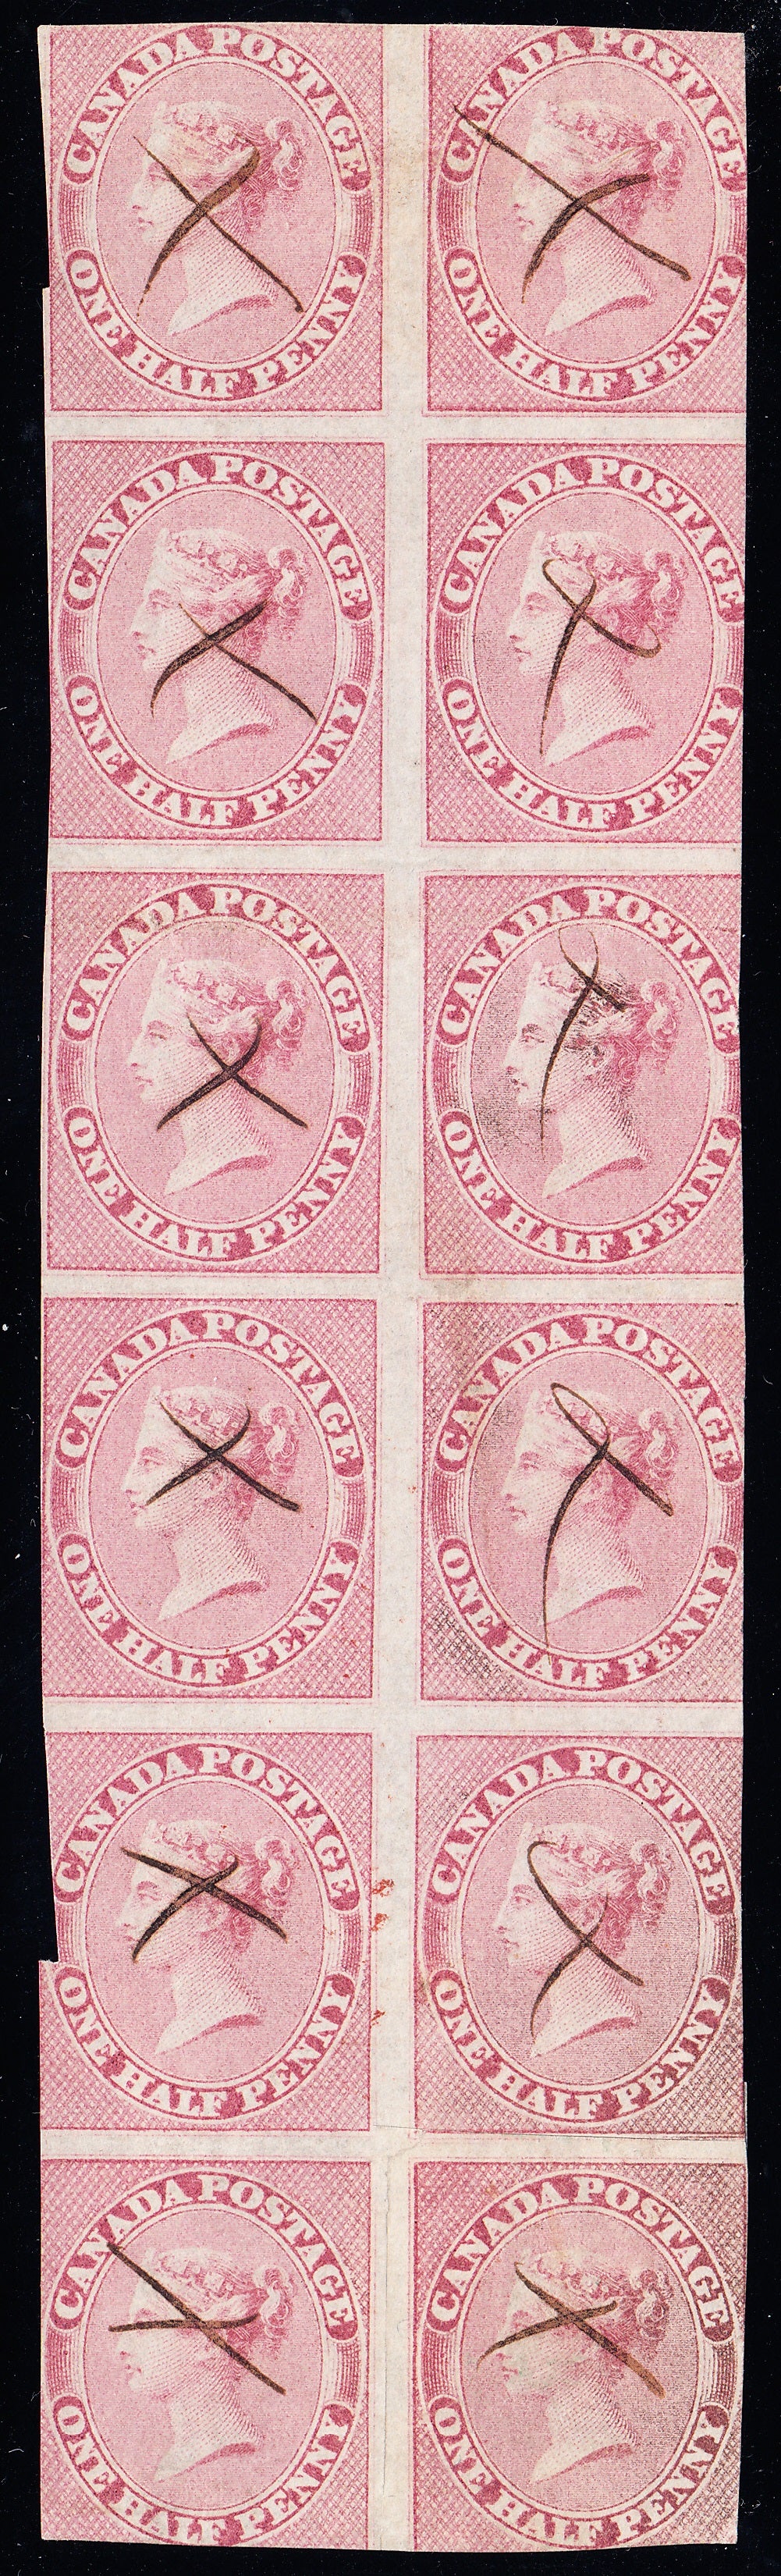 0008CA1803 - Canada #8 - Used Block of 12 - Re-Entries, w/ Cert